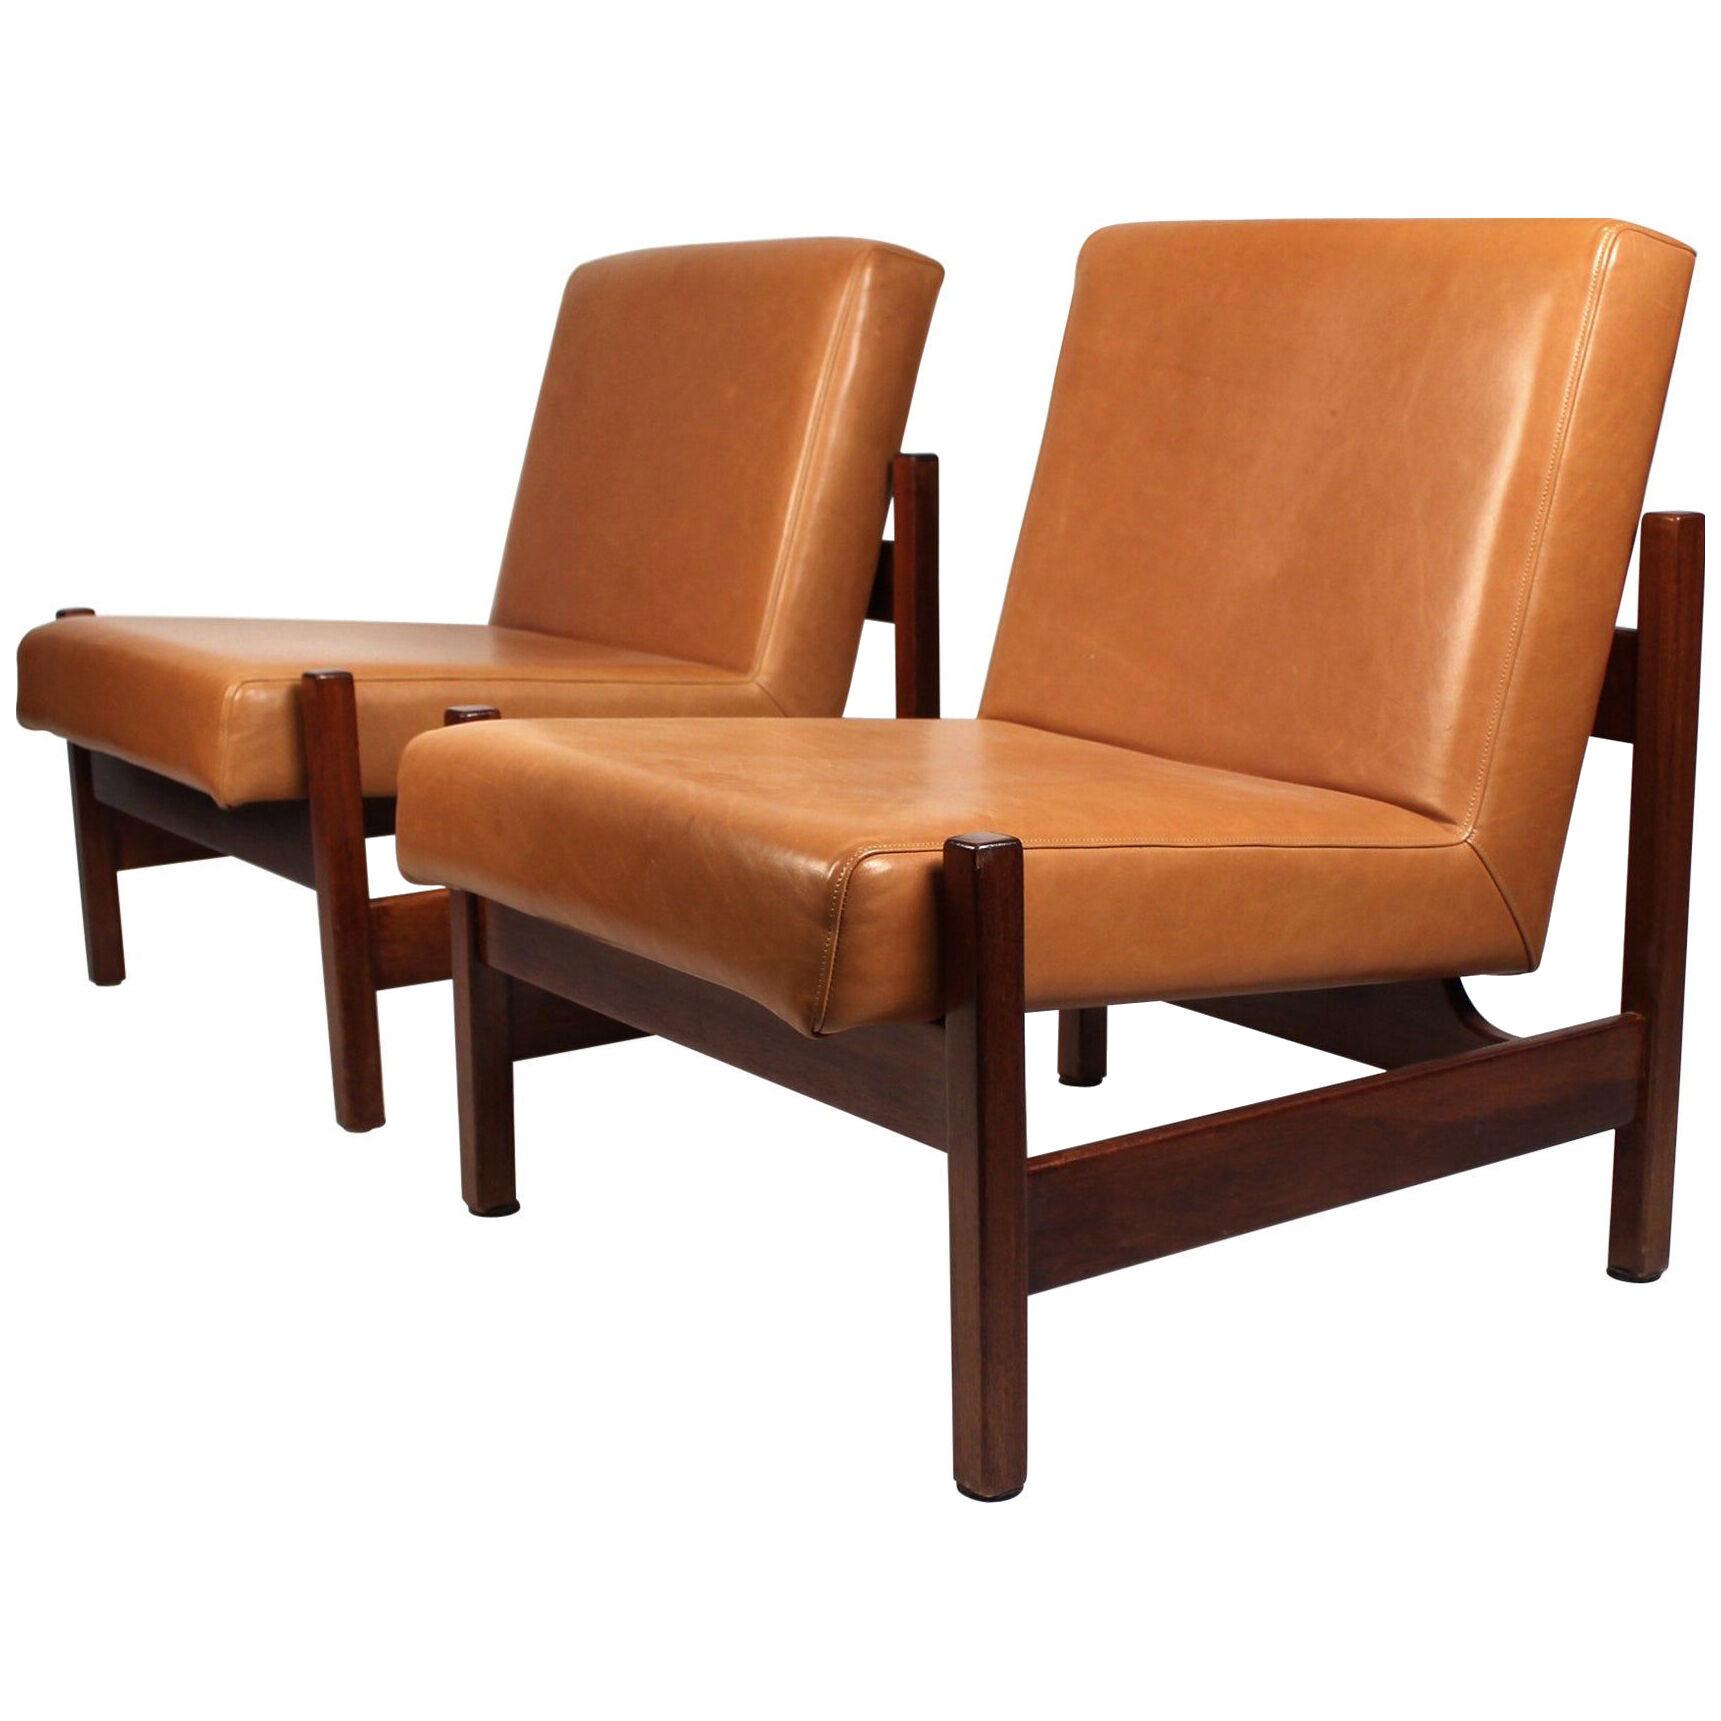 Joaquim Tenreiro Style Peroba Lounge Chairs in leather for Knoll & Forma Brazil